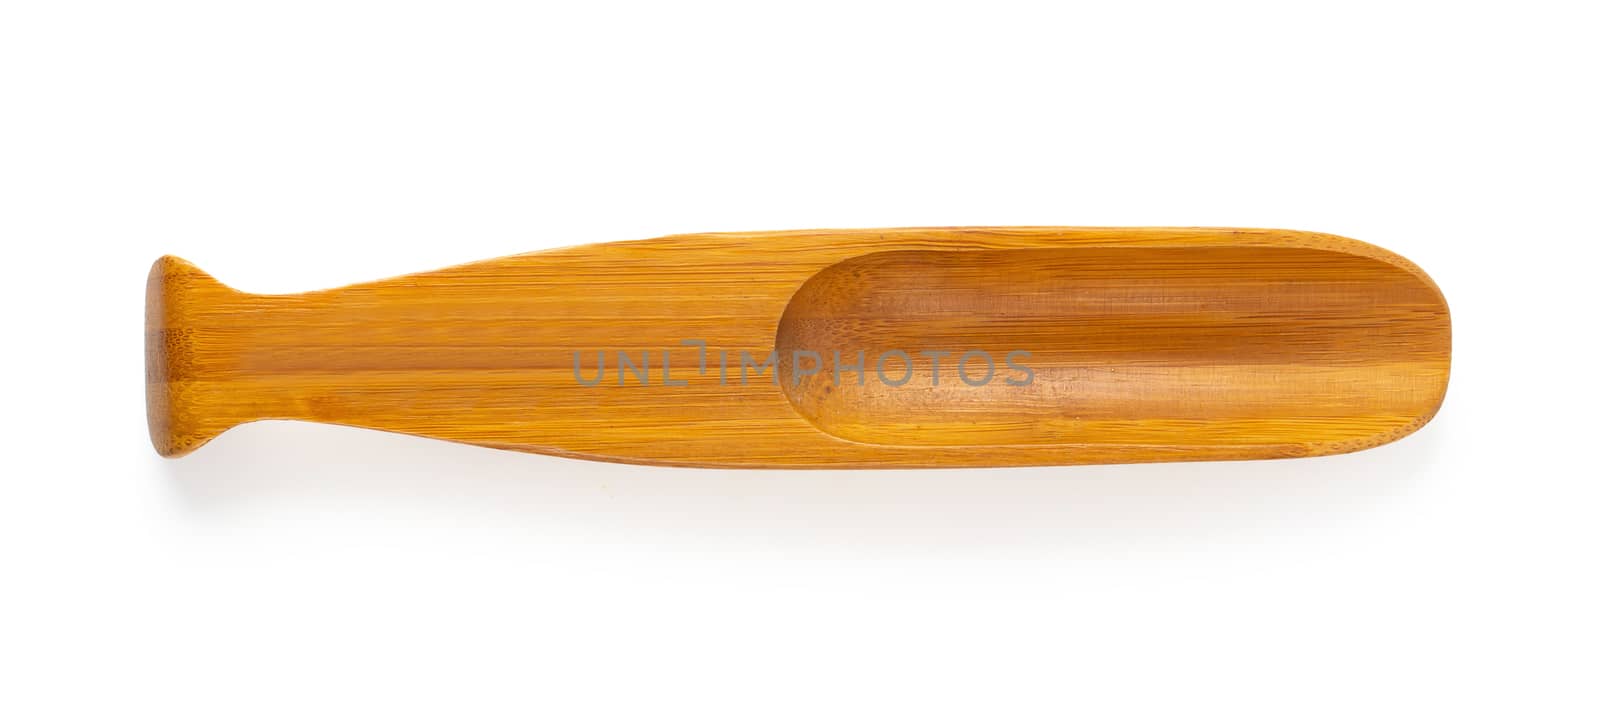 Wooden spoon isolated on a white background by kaiskynet